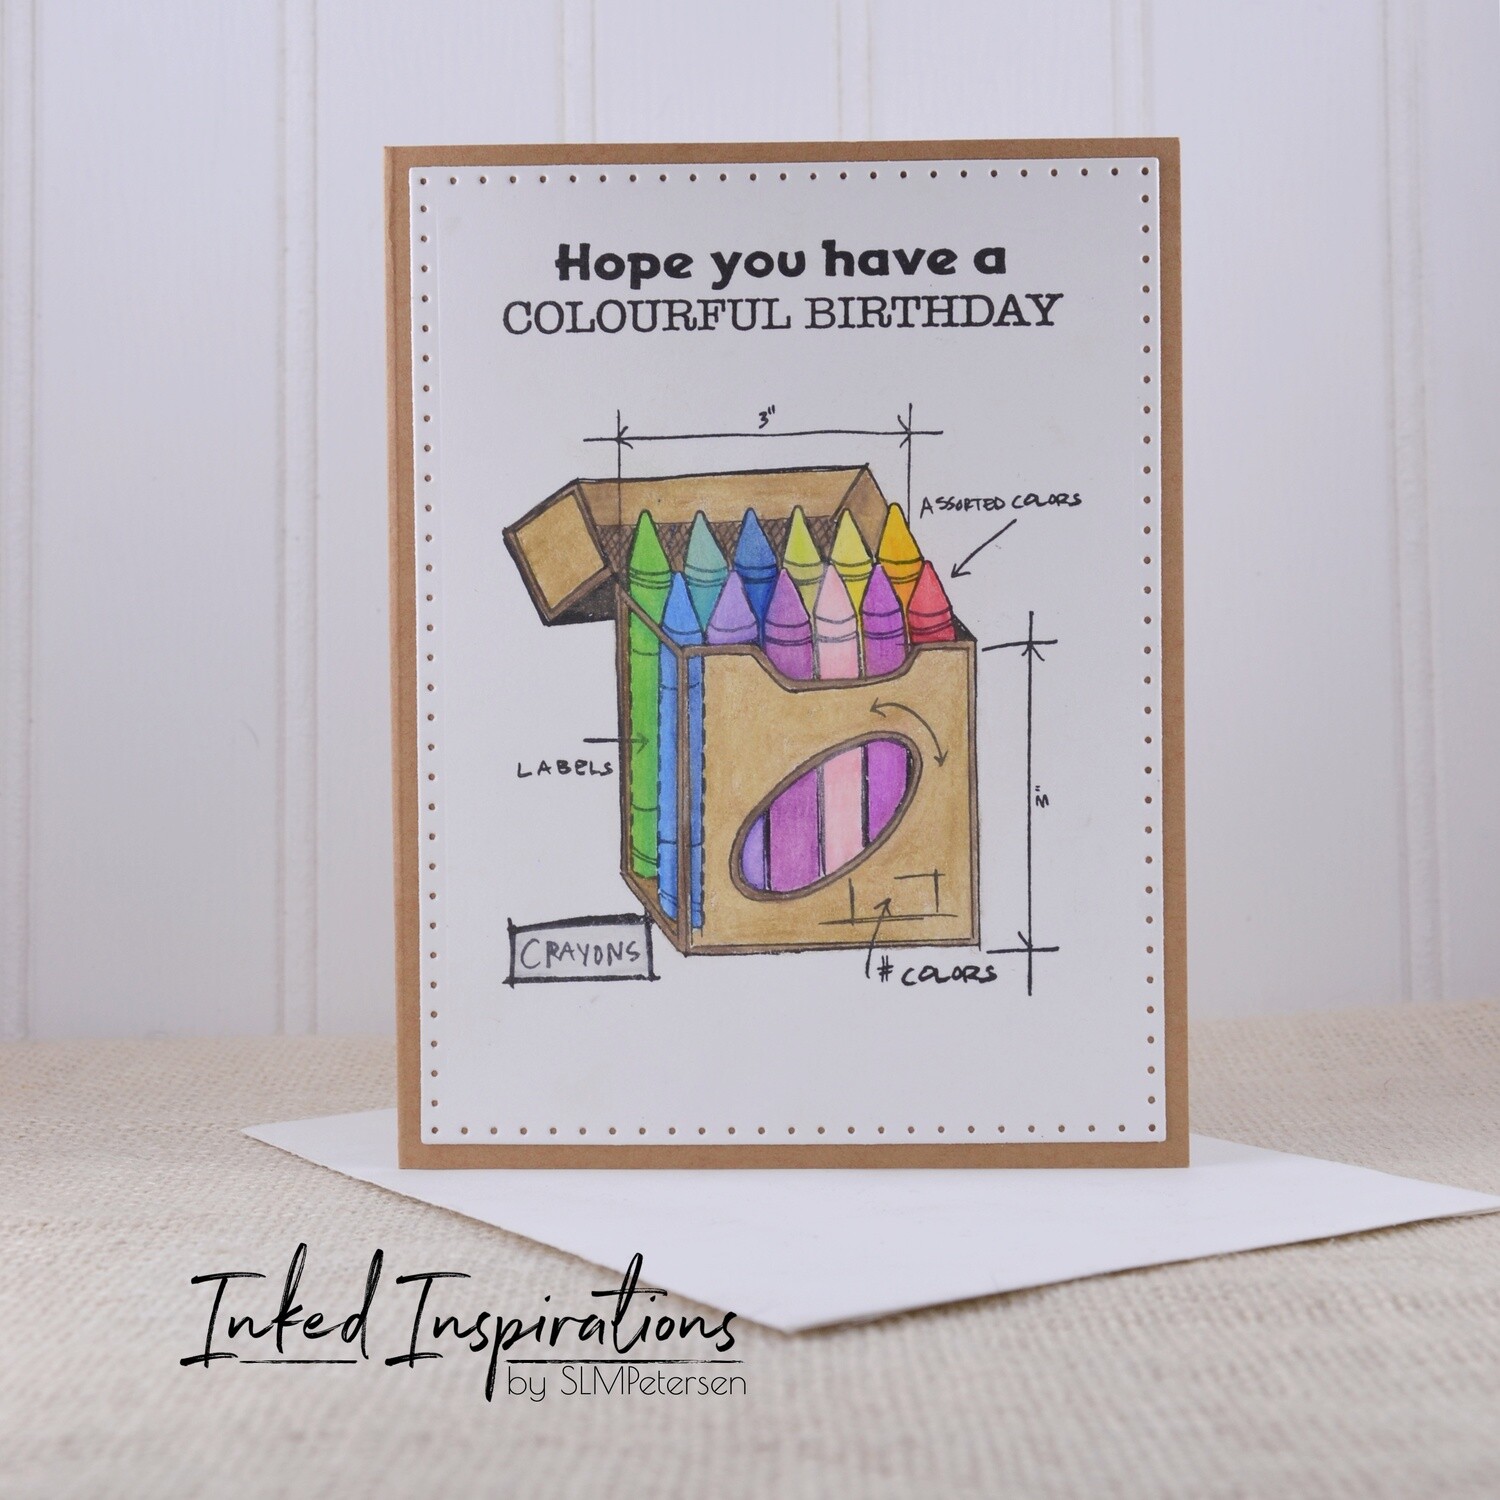 Hope You Have a Colorful Birthday - Box of Crayons #4